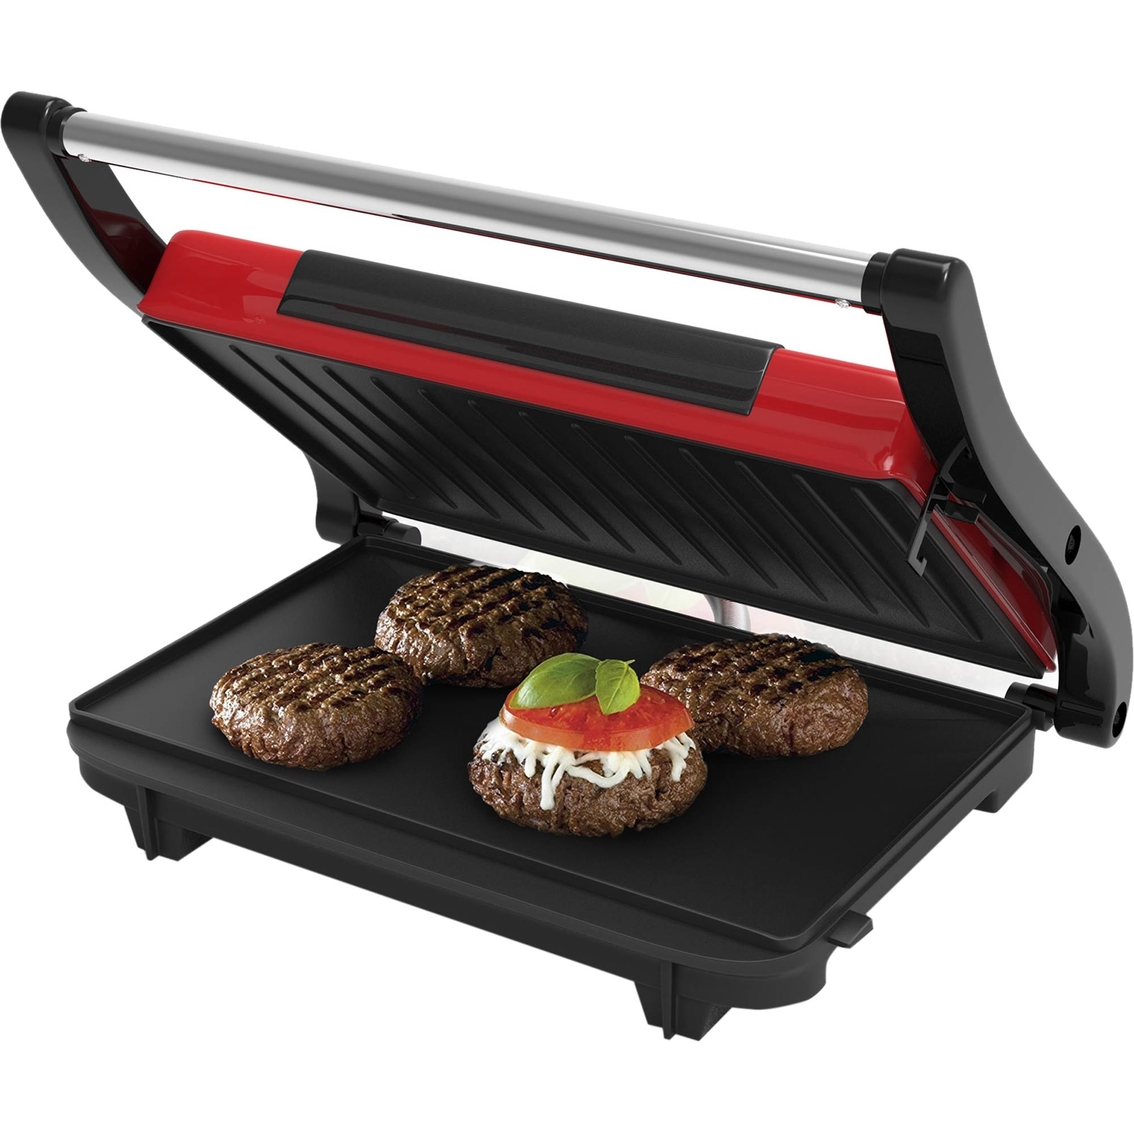 Chef Buddy Panini Press Indoor Grill and Gourmet Sandwich Maker - Image 3 of 4